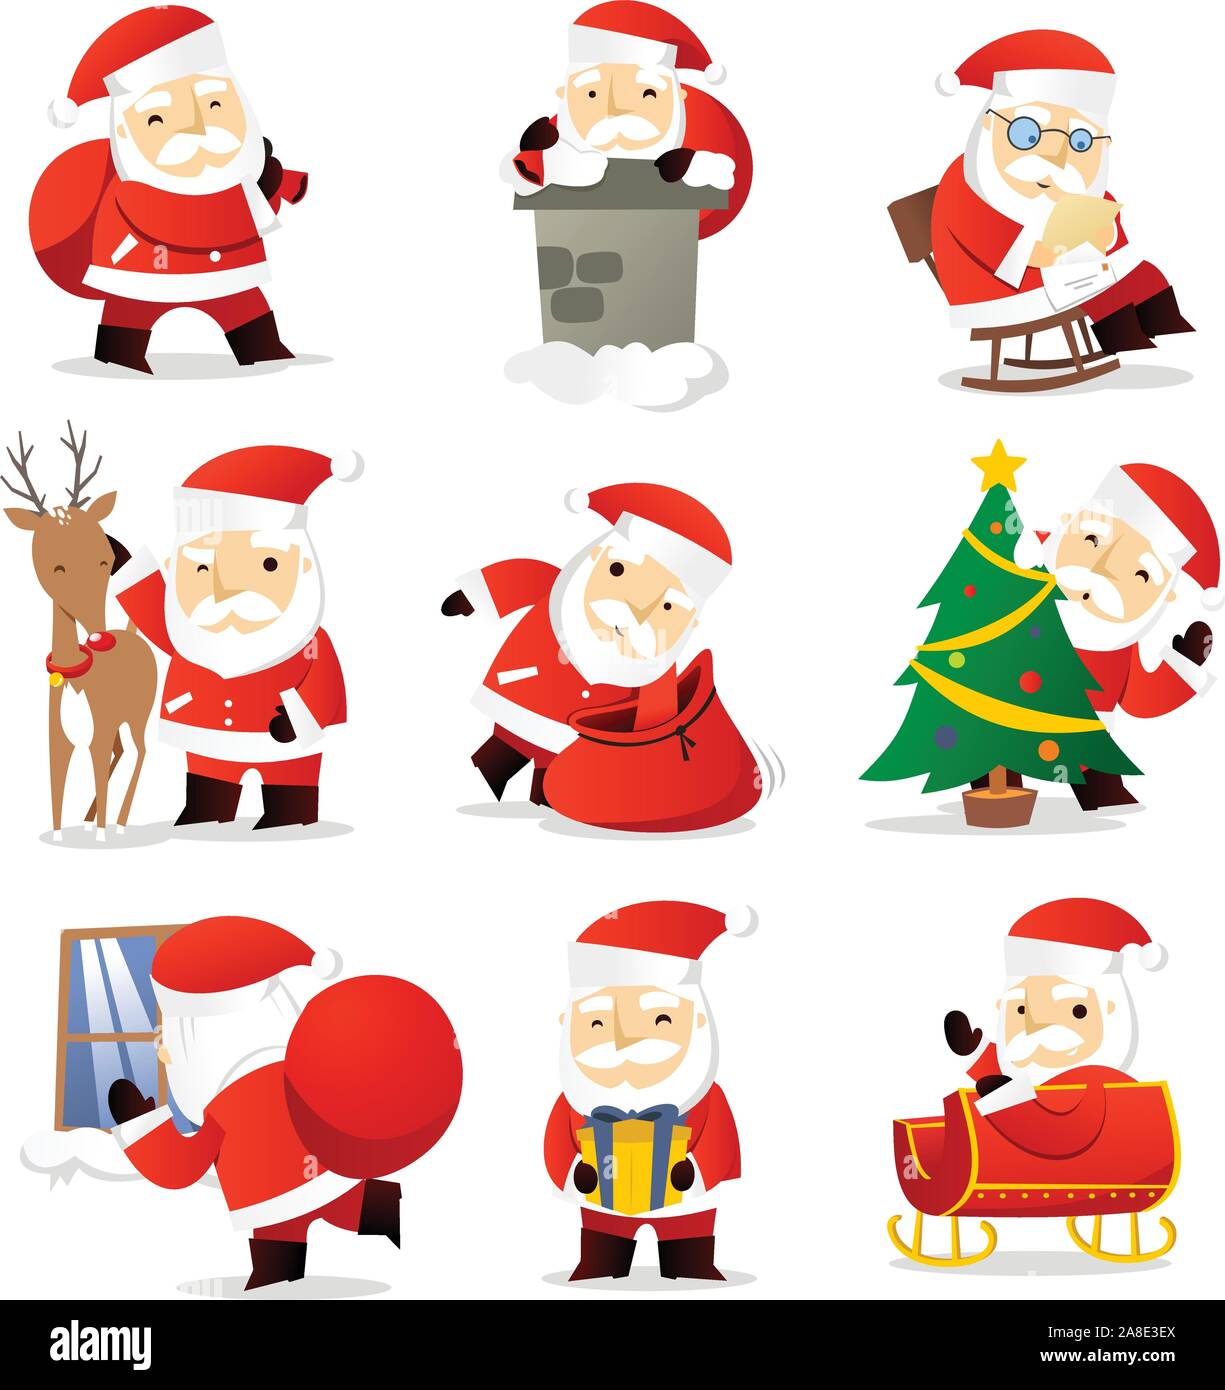 Rudolph the red nosed reindeer Stock Vector Images - Alamy